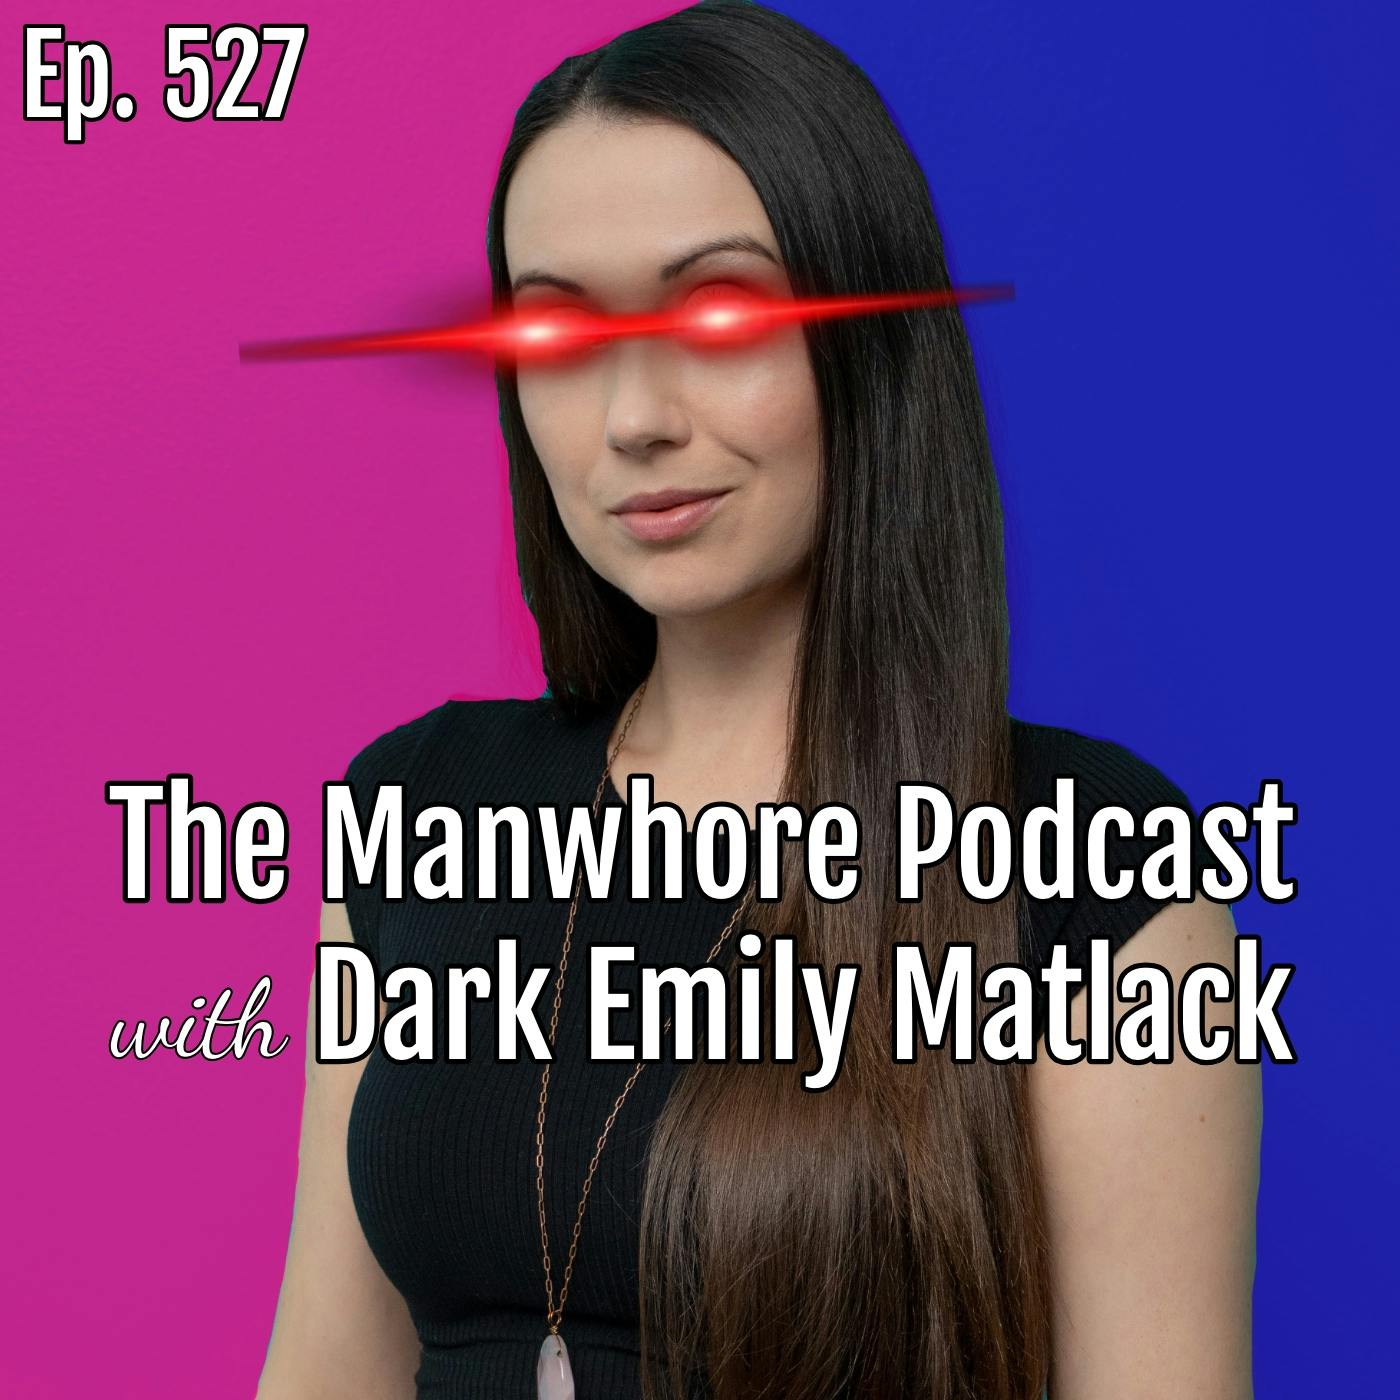 Ep. 527: Does Monogamy Even Work??? — with Emily Matlack from Multiamory